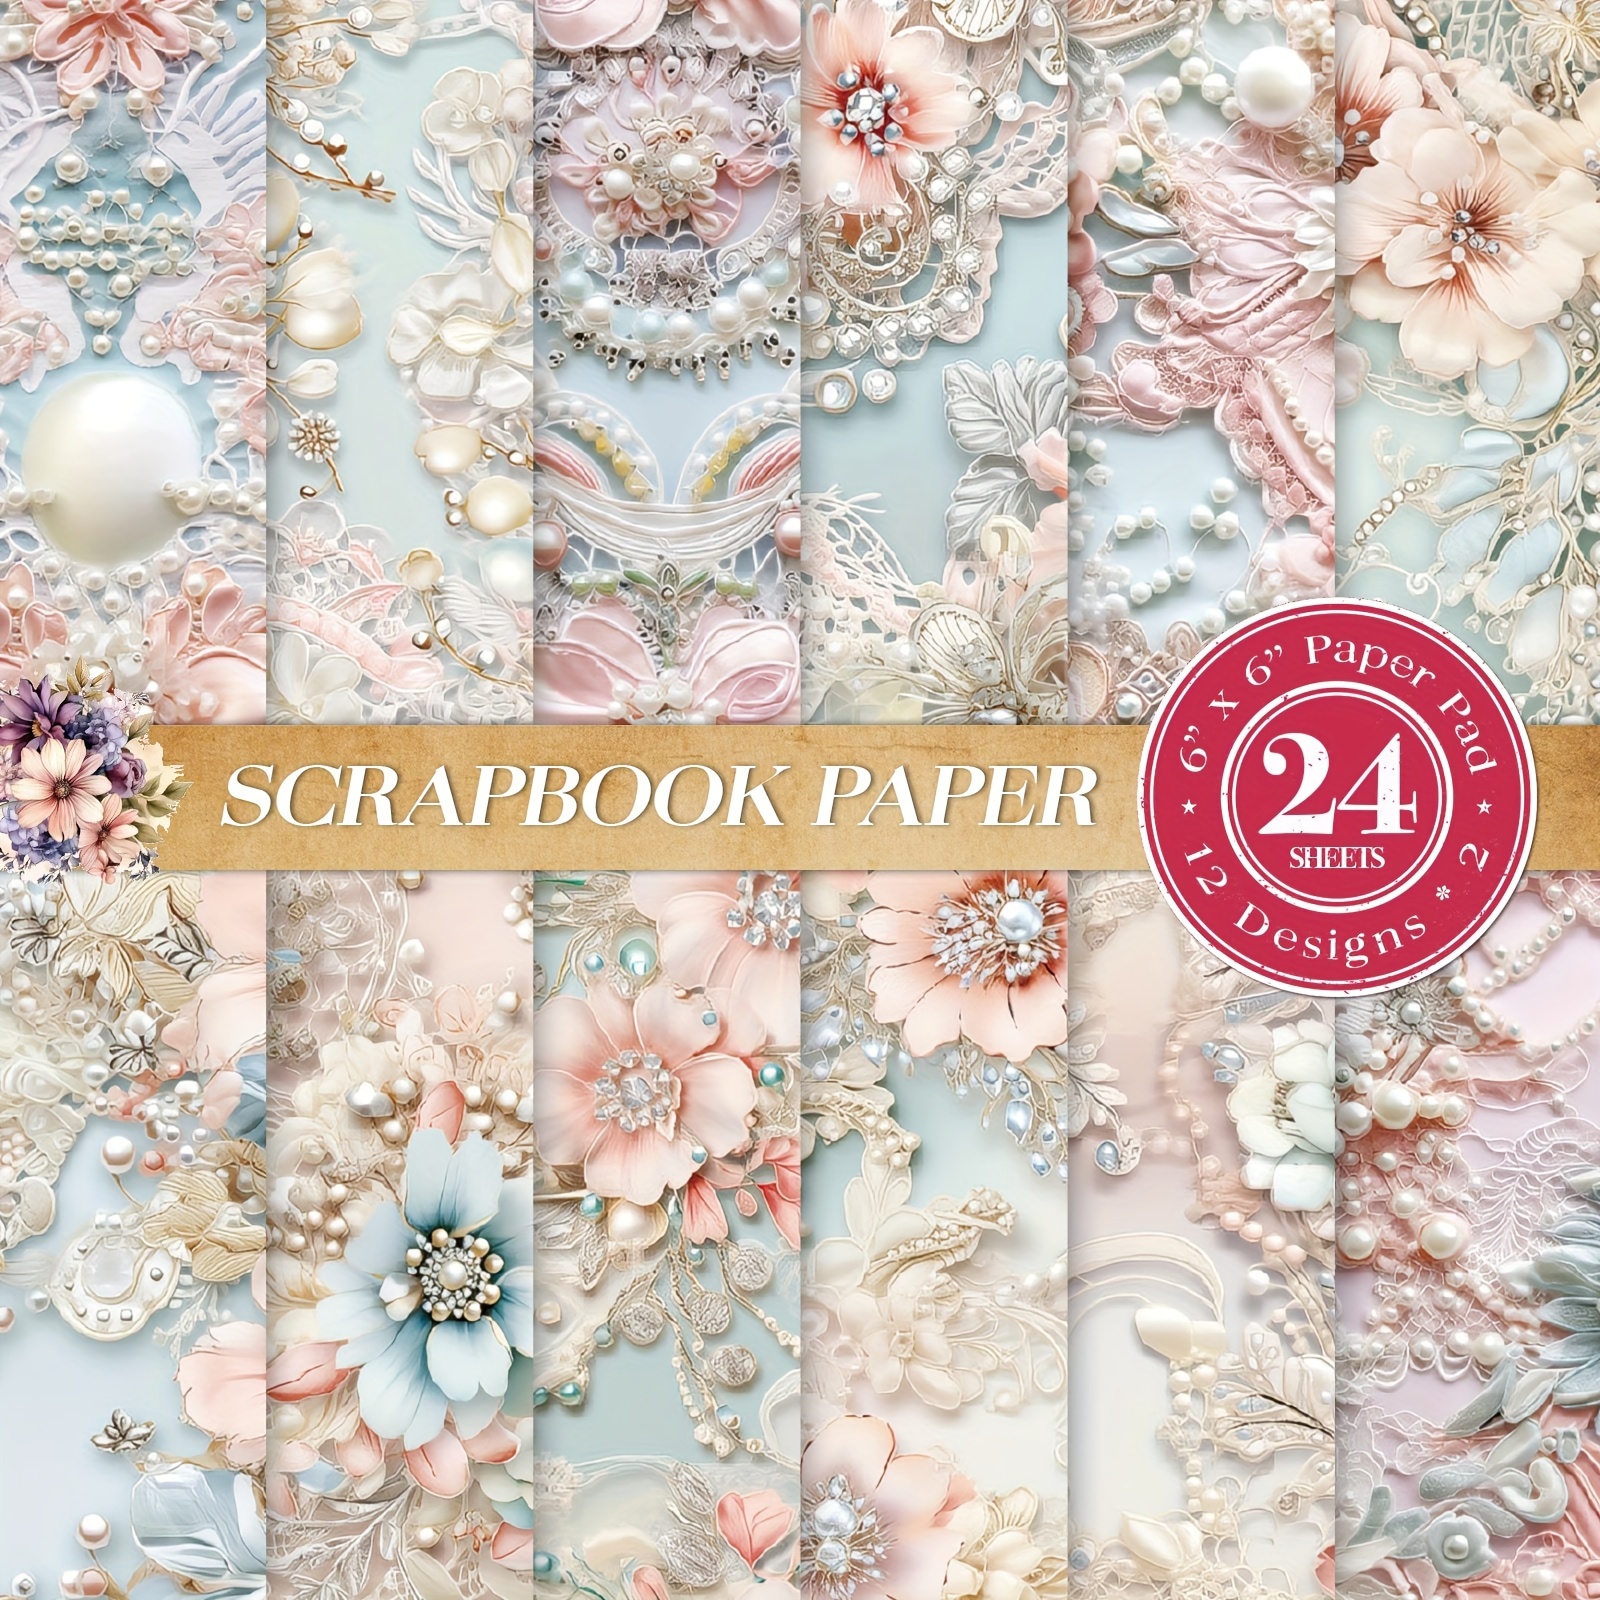 

24pcs Vintage Floral Lace & Pearls Scrapbook Paper Set - Embroidered Craft Sheets For Journaling, Card Making, Albums, Gift Wrapping - Mixed Color Flower Themed 6-inch Embellished Cardstock Pack